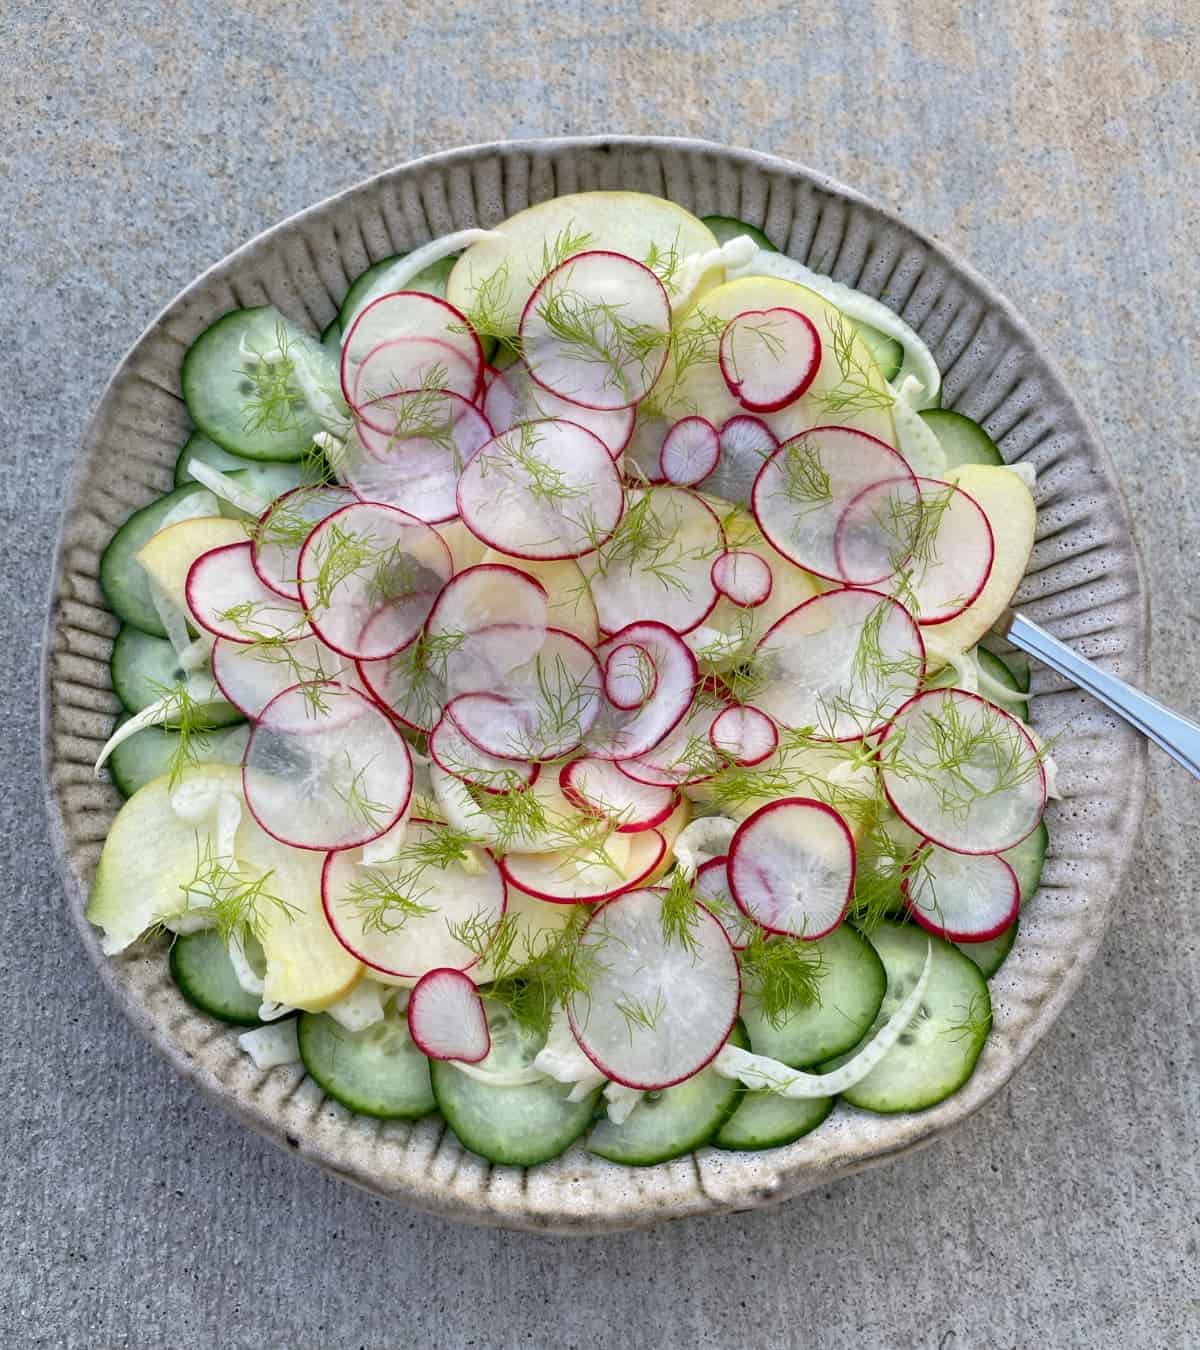 Shaved fennel salad with English cucumber slices, radish and Honeycrsip apples in brown serving dish with spoon.